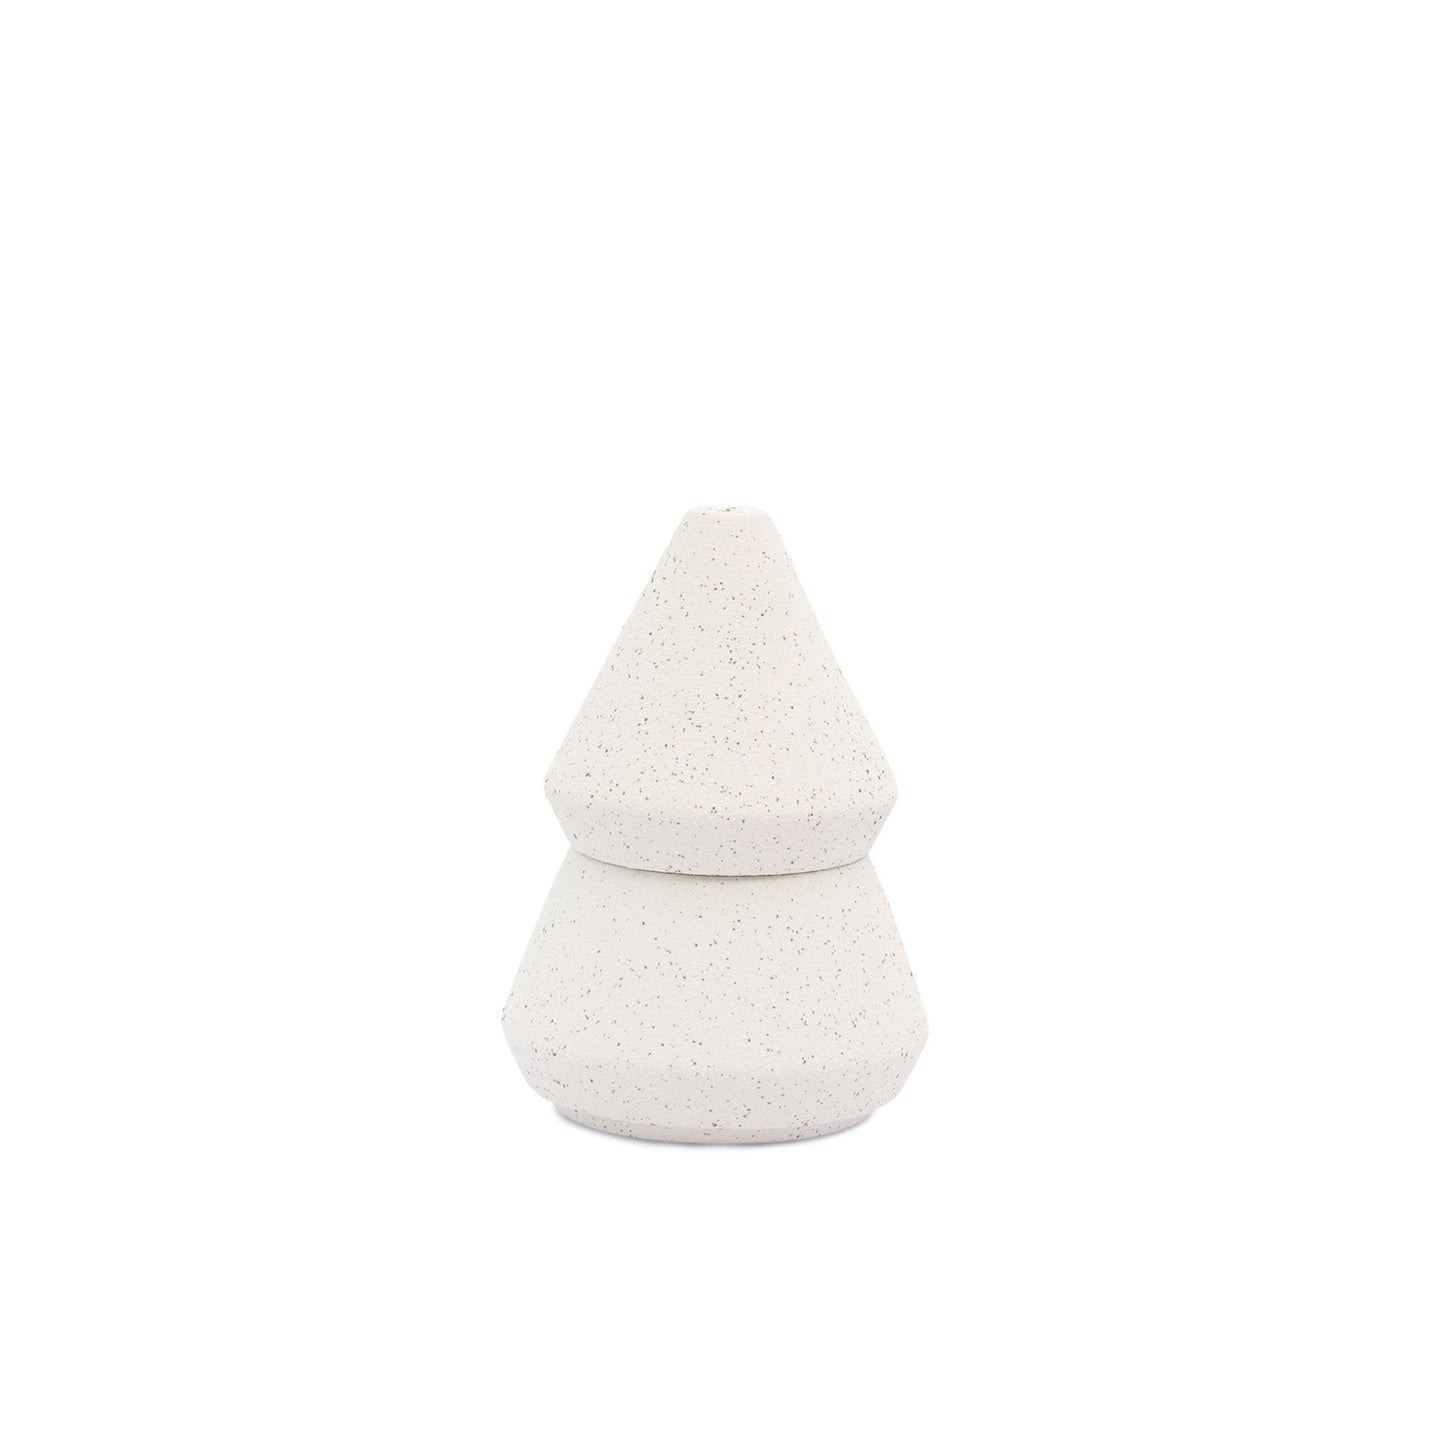 Cypress & Fir - Small White Tree Stack (155g)